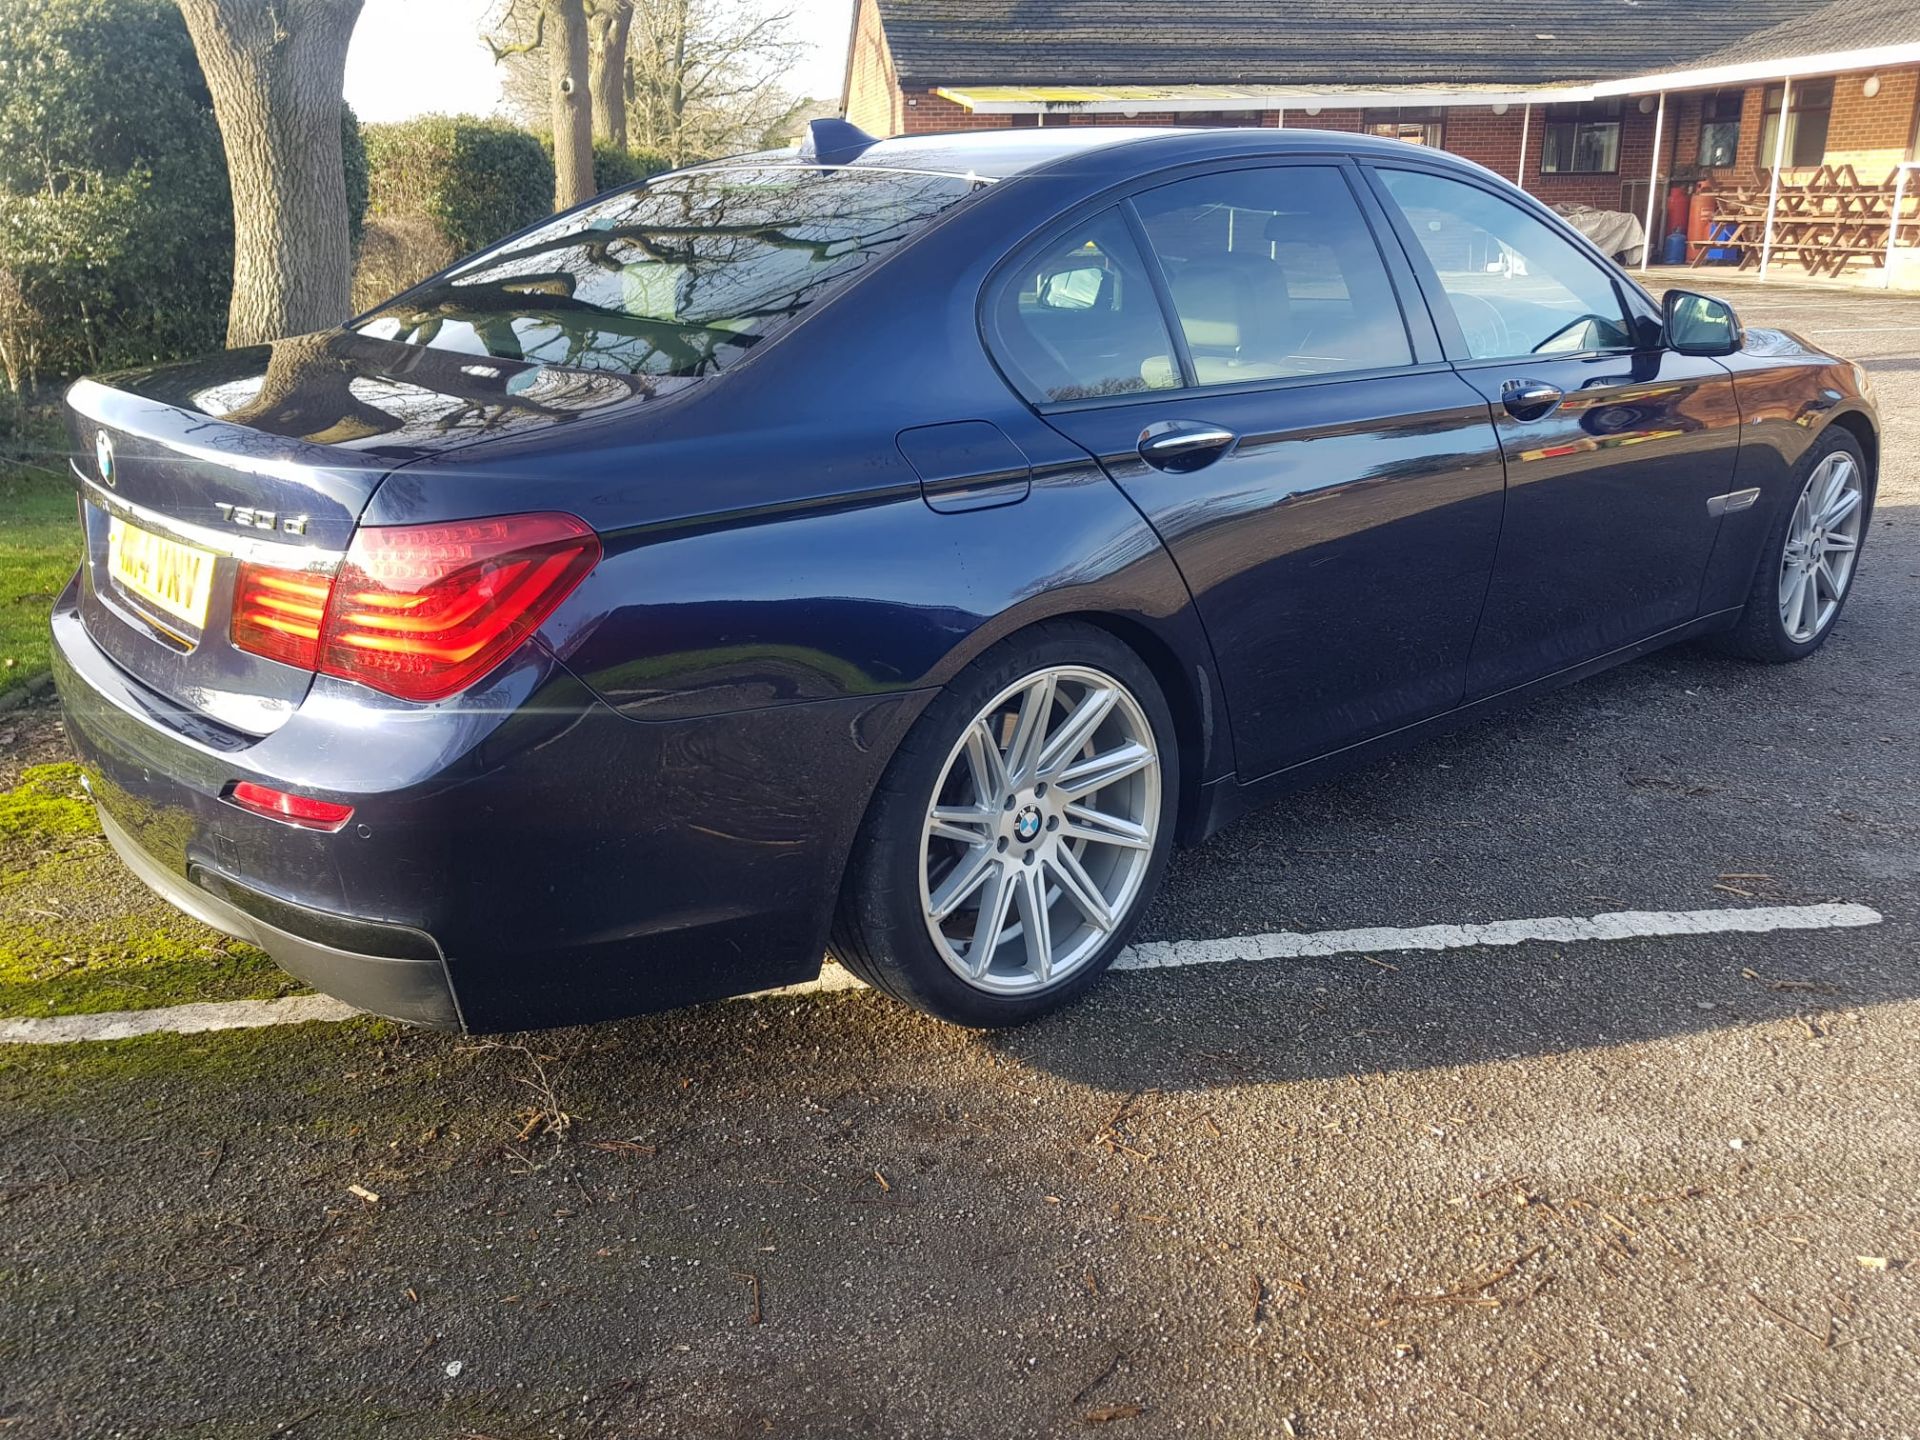 2014 730D M-SPORT SALOON - FULL SERVICE HISTORY - 115K MILES - Image 33 of 43